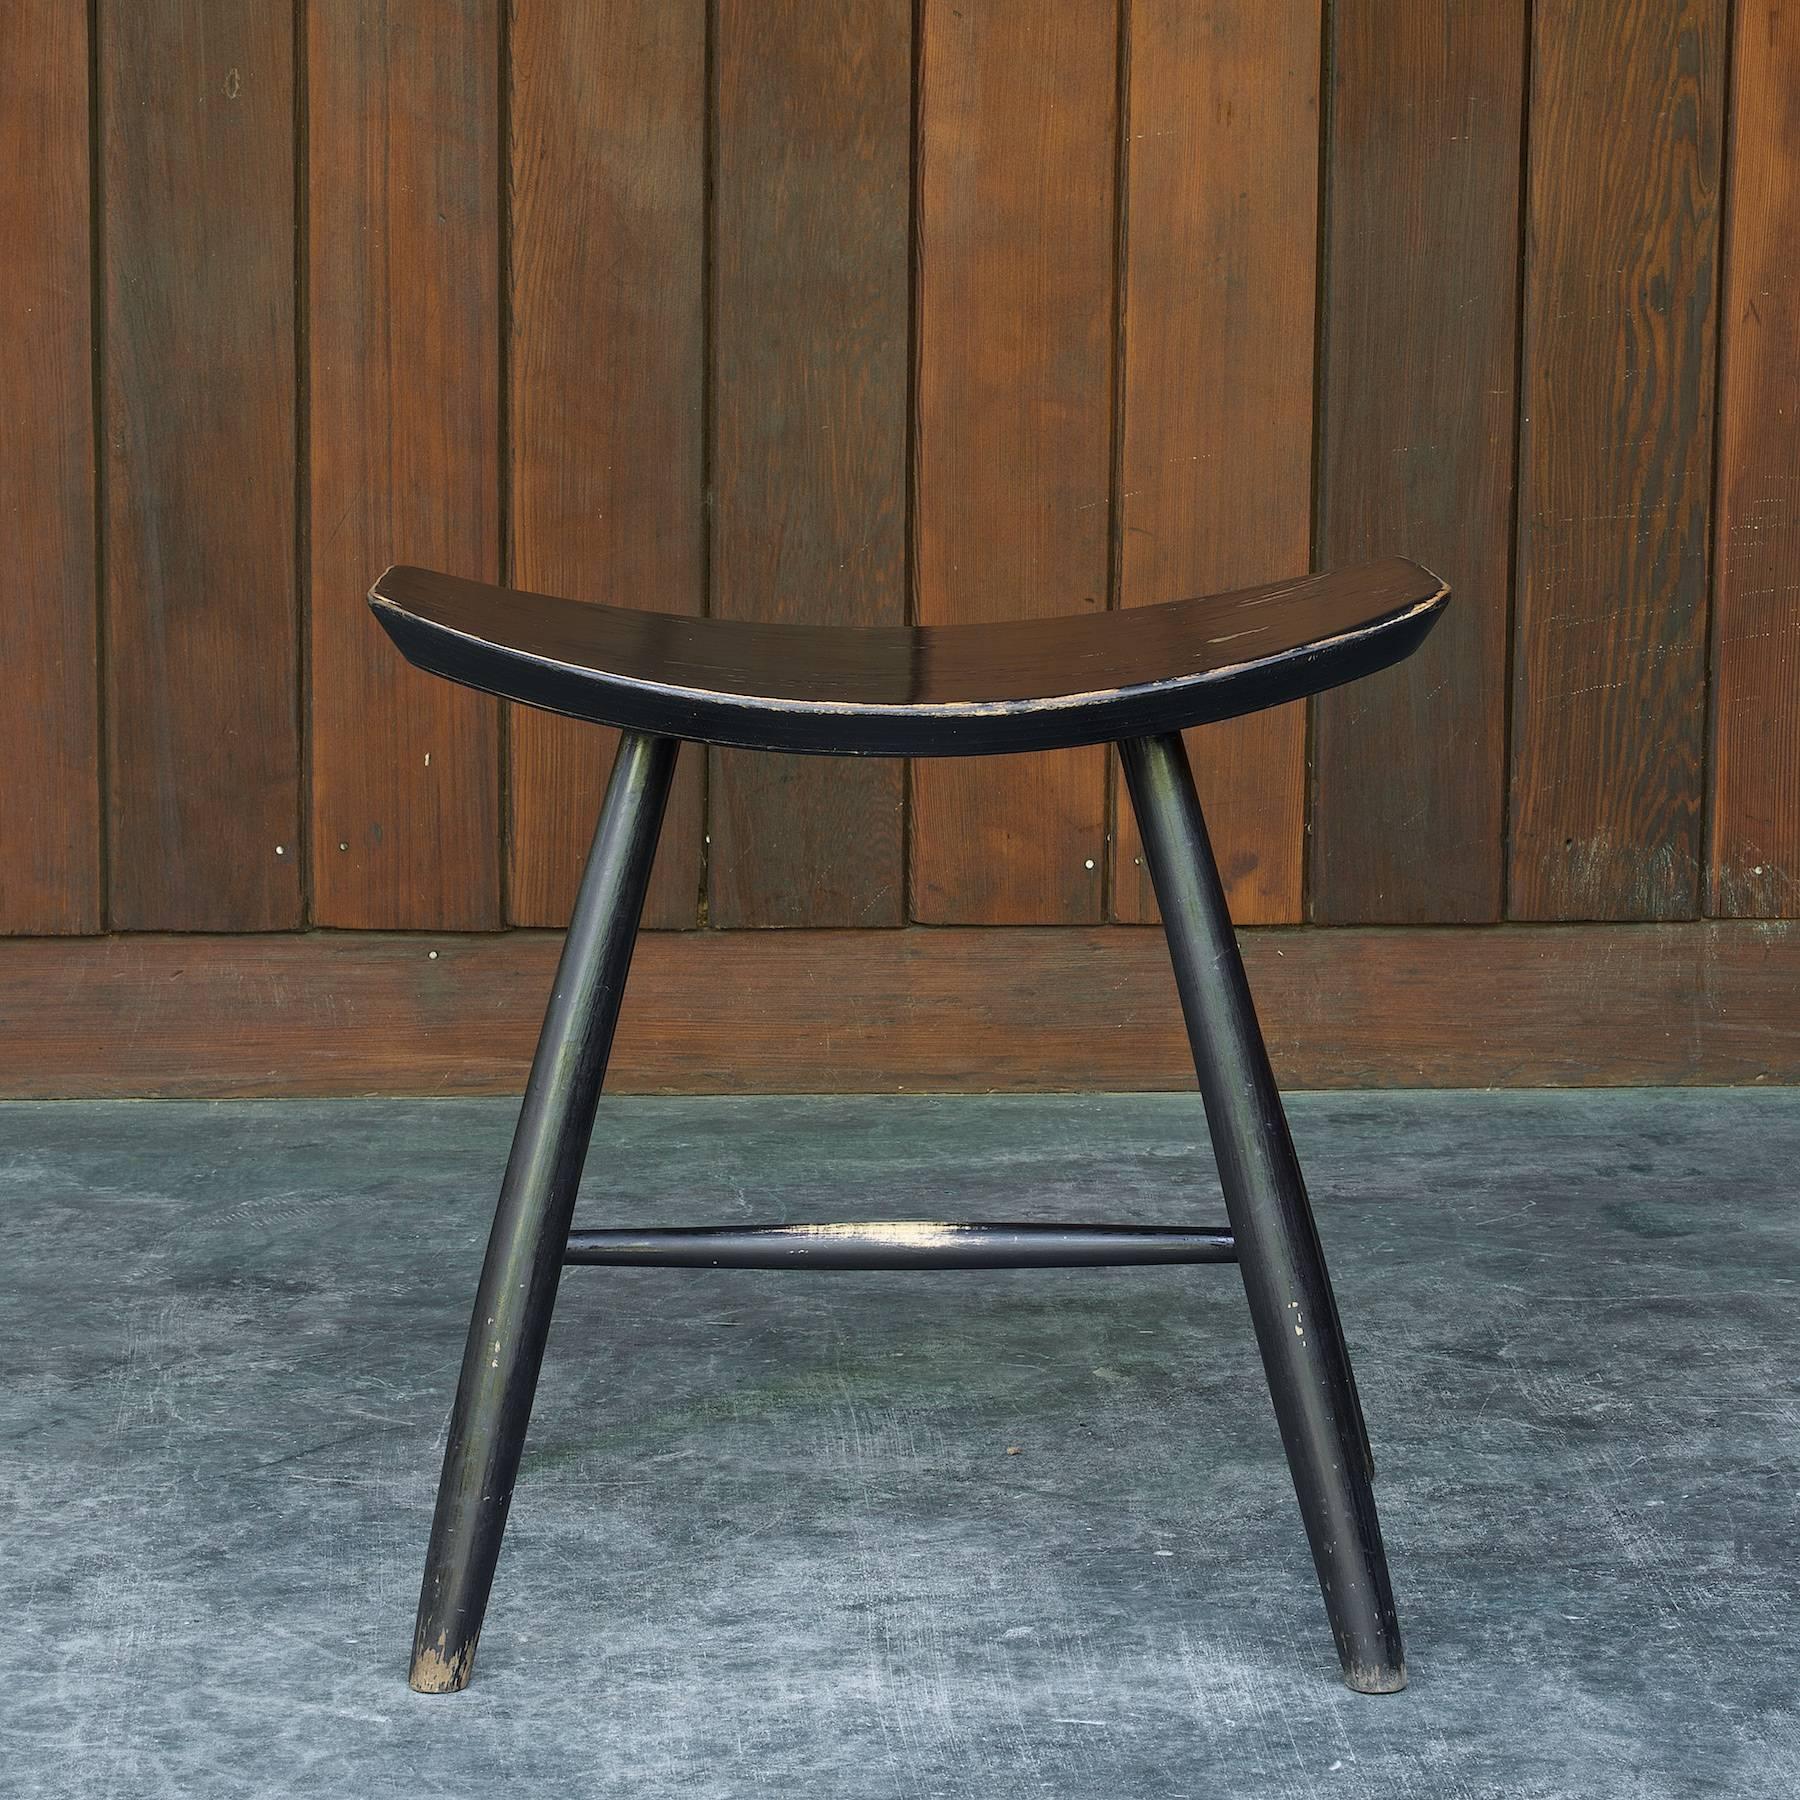 Tight and strong little milking stool. Or room accent, towel prop.